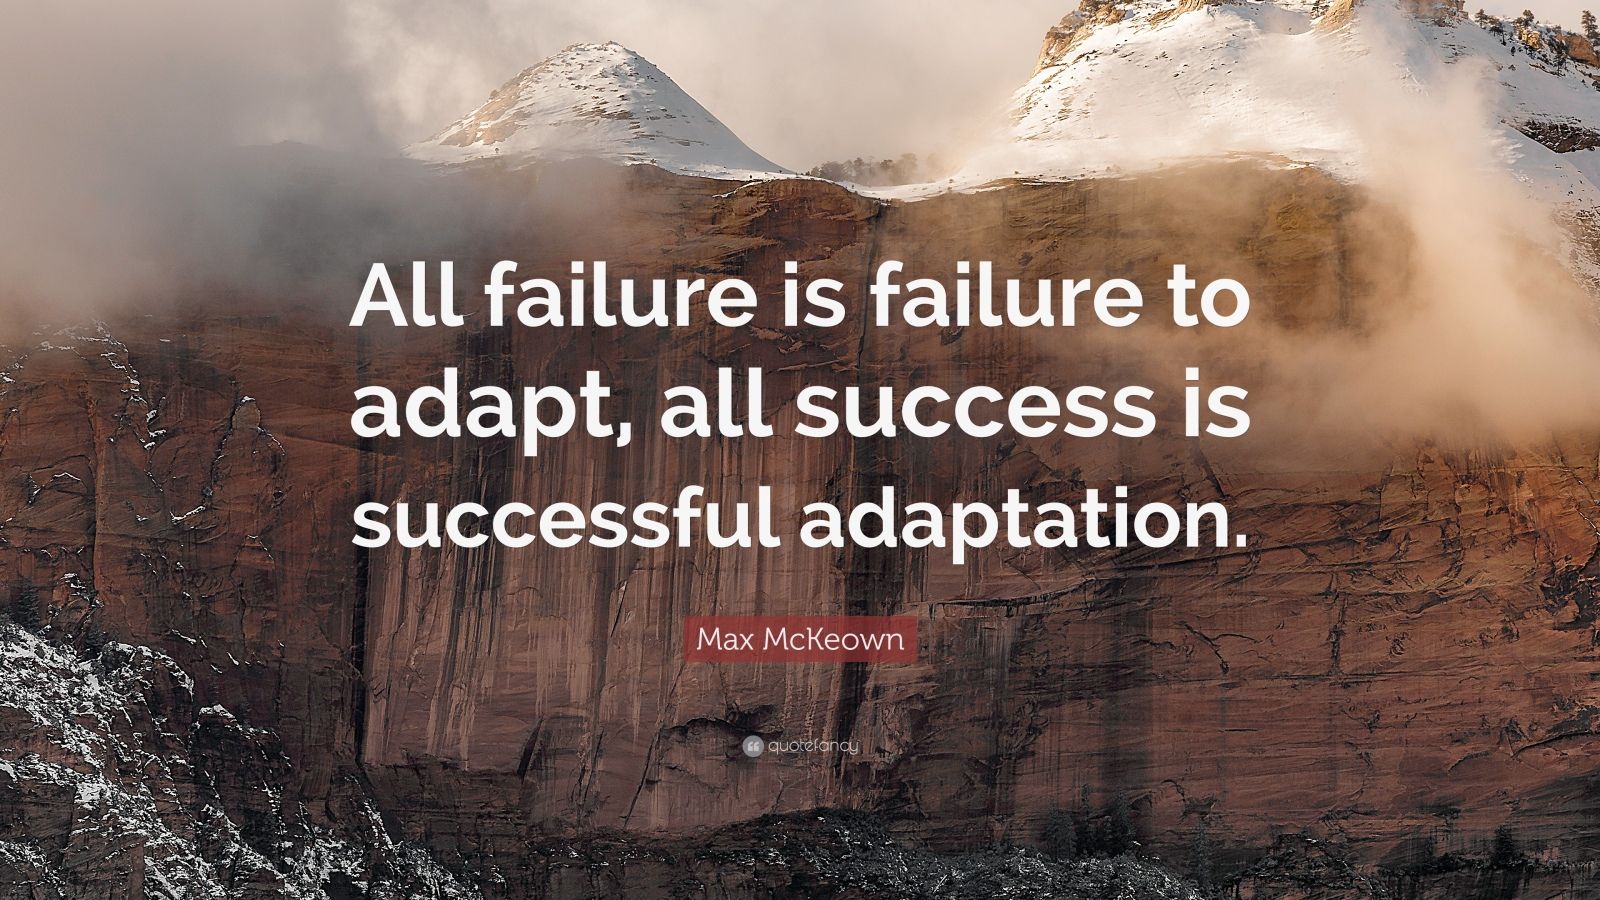 Max McKeown Quote: “All failure is failure to adapt, all success is